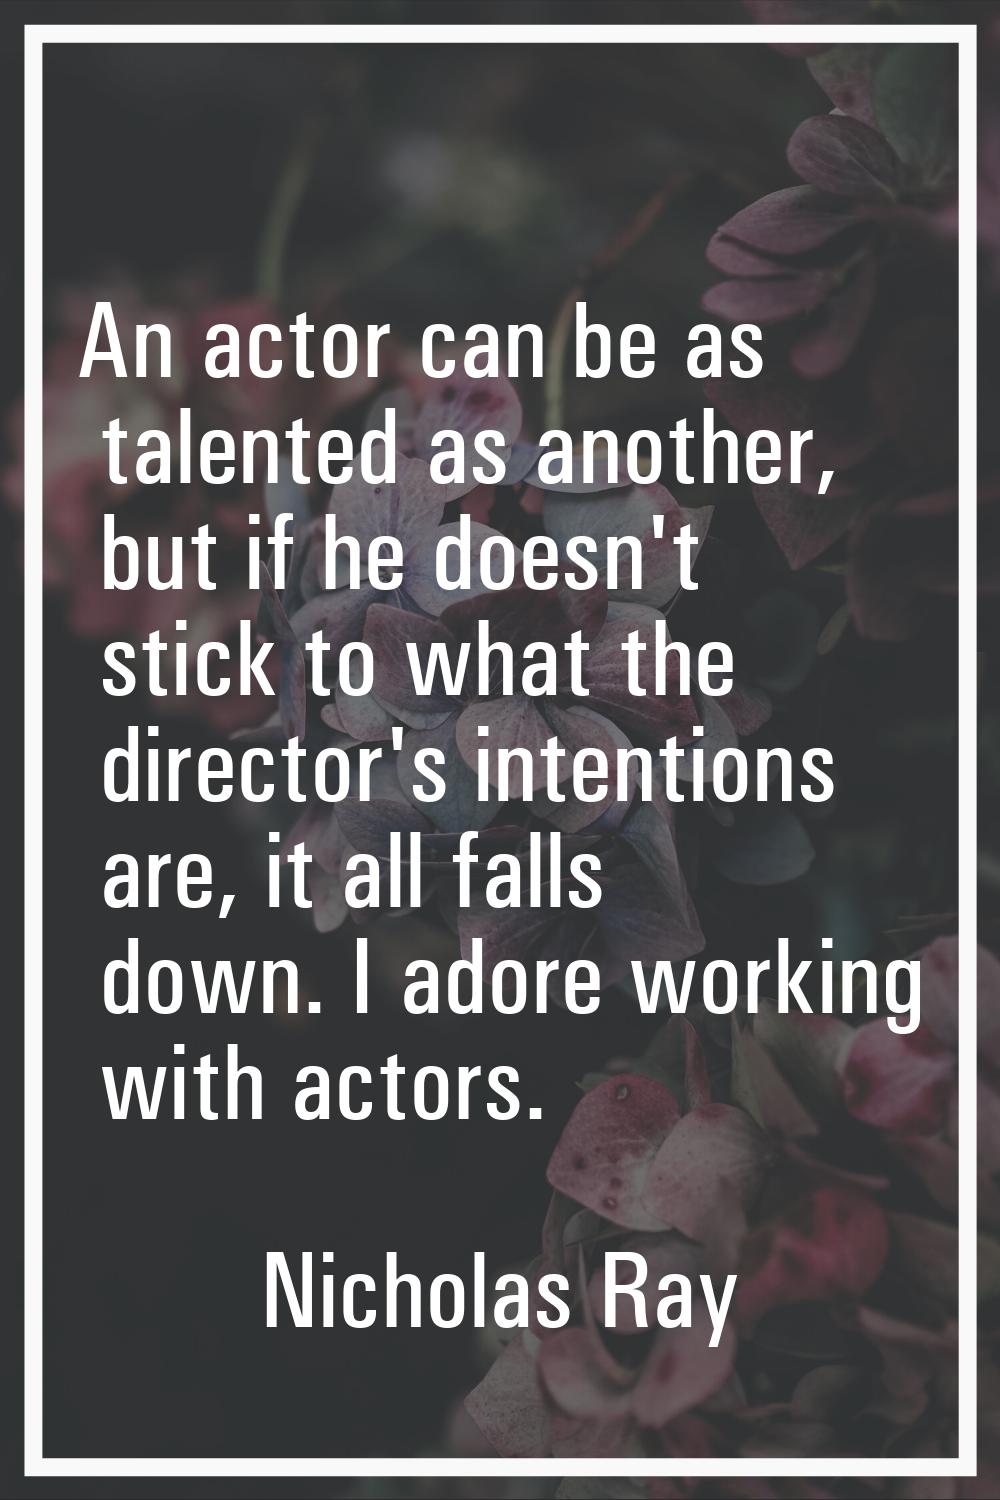 An actor can be as talented as another, but if he doesn't stick to what the director's intentions a